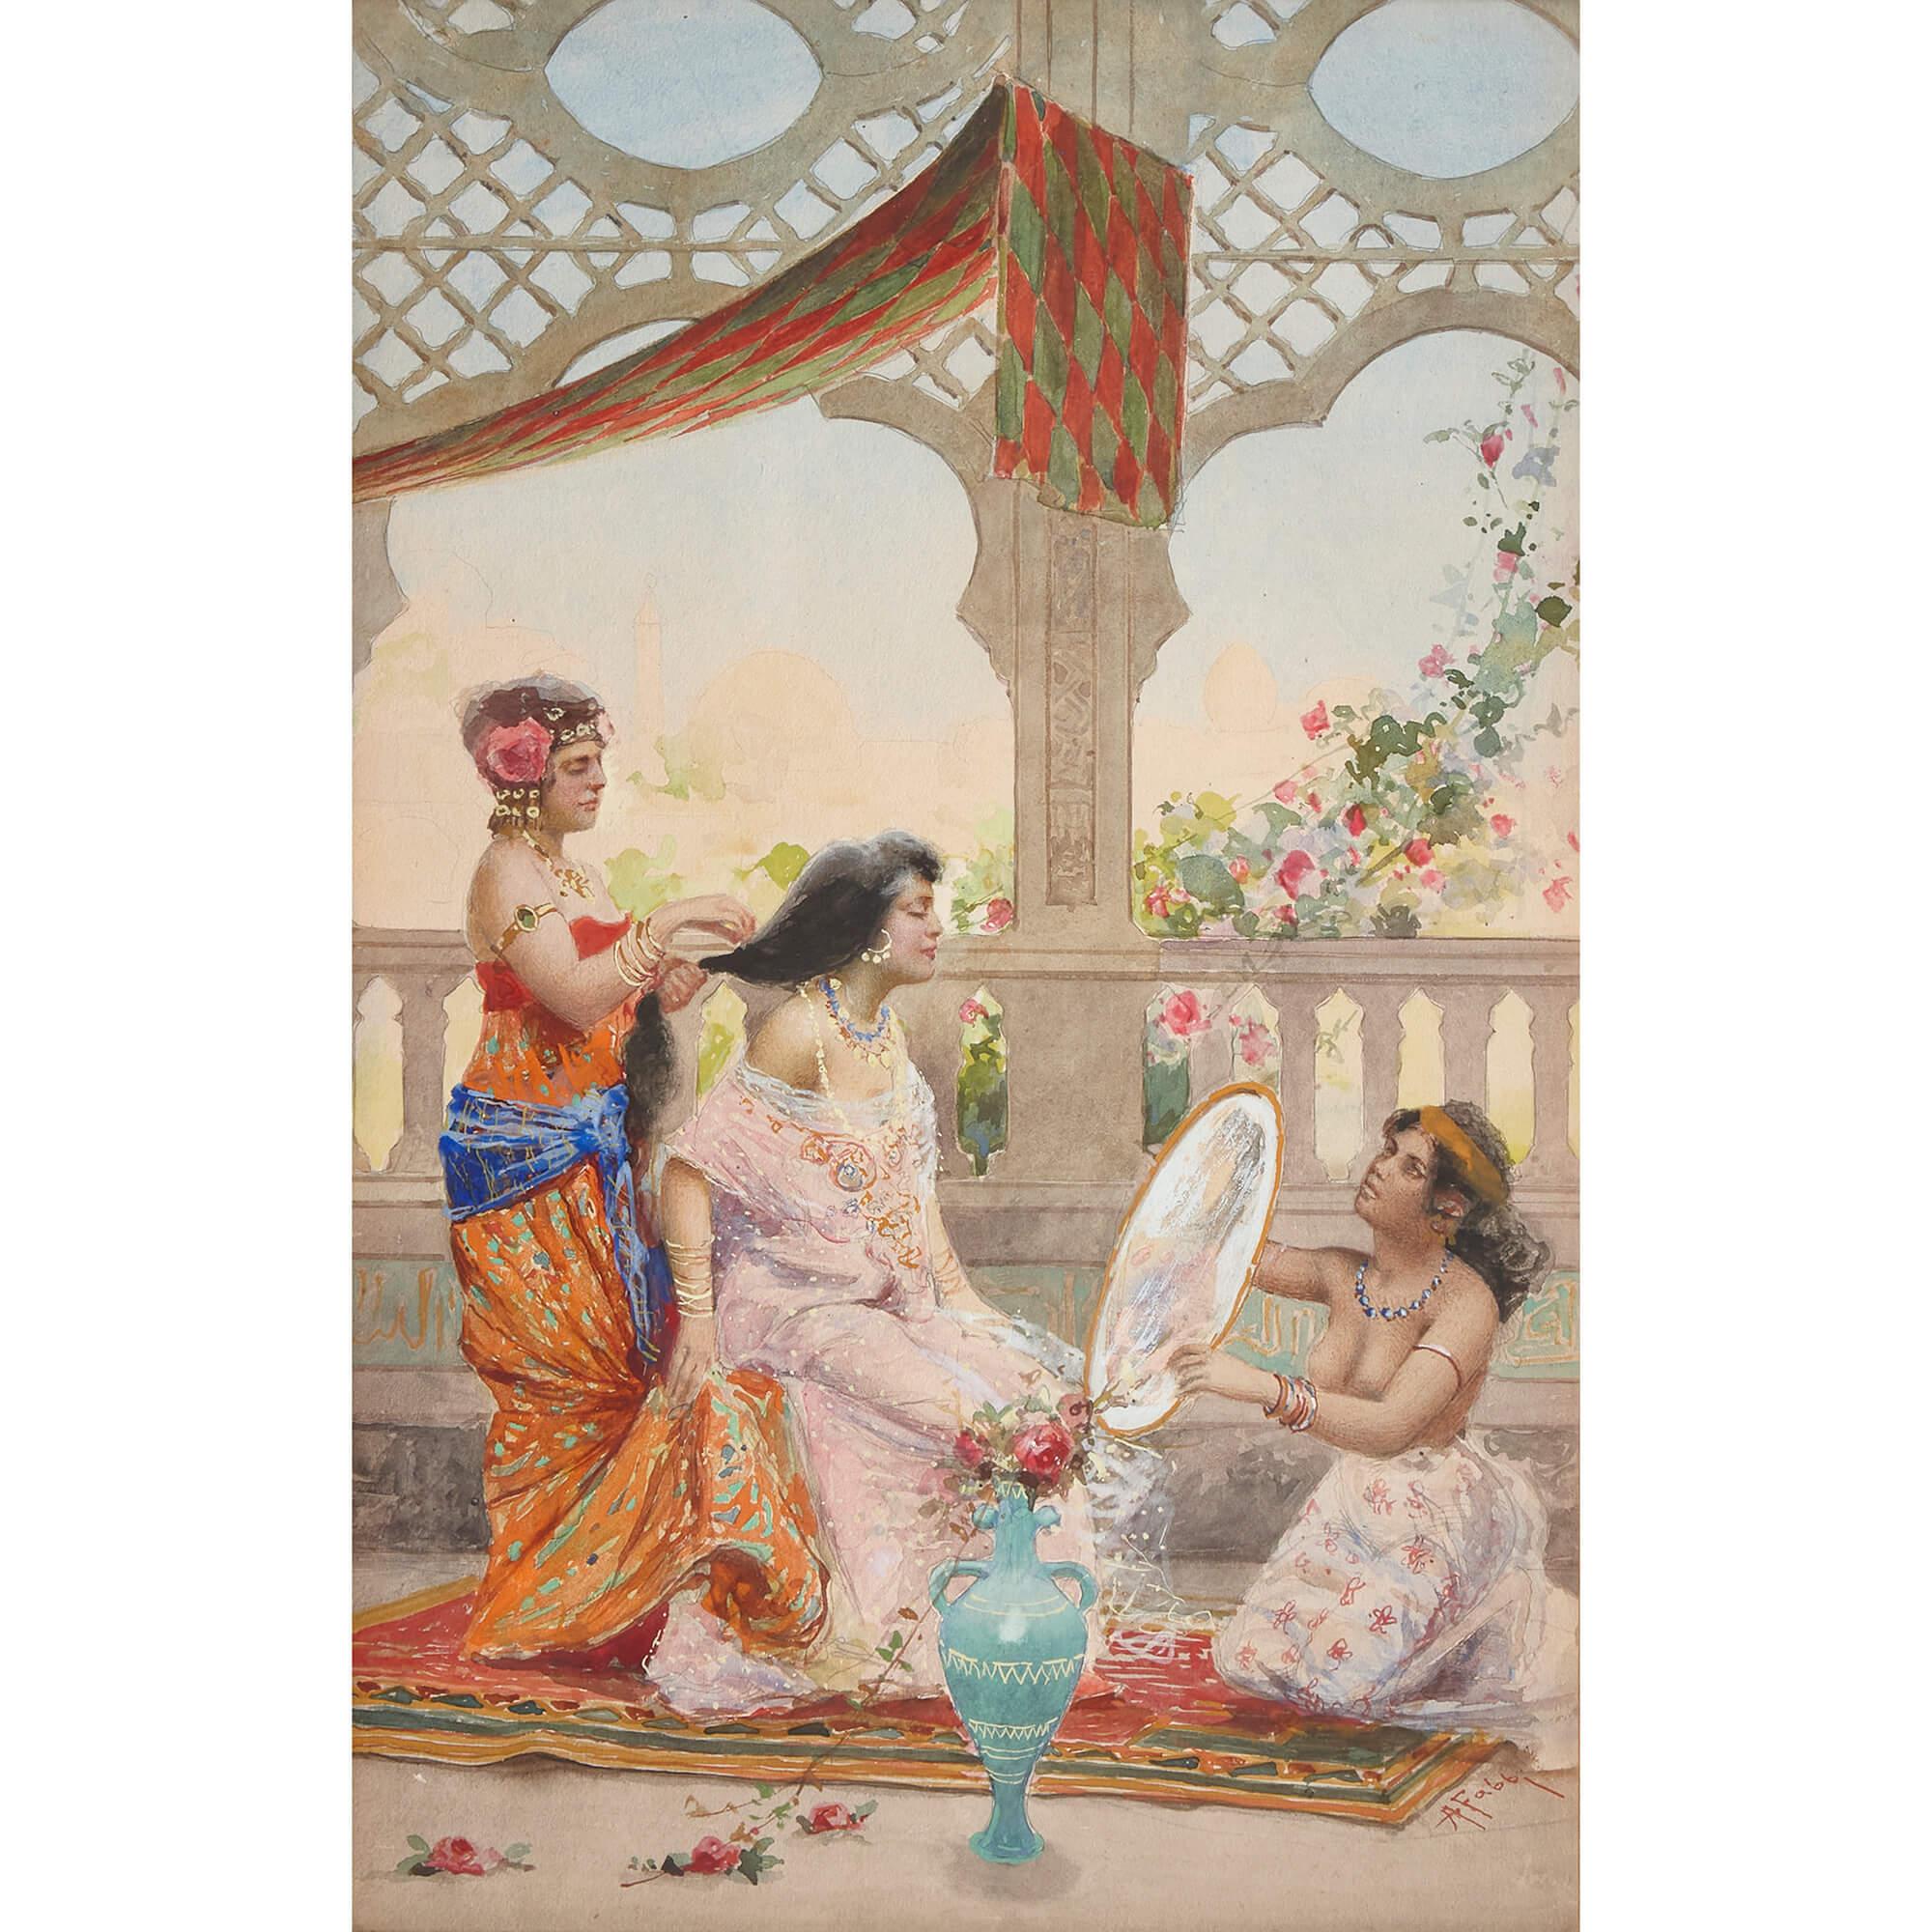 Orientalist antique watercolour painting of a woman dressing, A. Fabbi
Italian, 19th Century
Panel: Height 40cm, width 25cm
Frame: Height 60cm, width 45cm, depth 6cm

This sensitive watercolour painting by Alberto Fabbi (1858-1906) depicts a seated